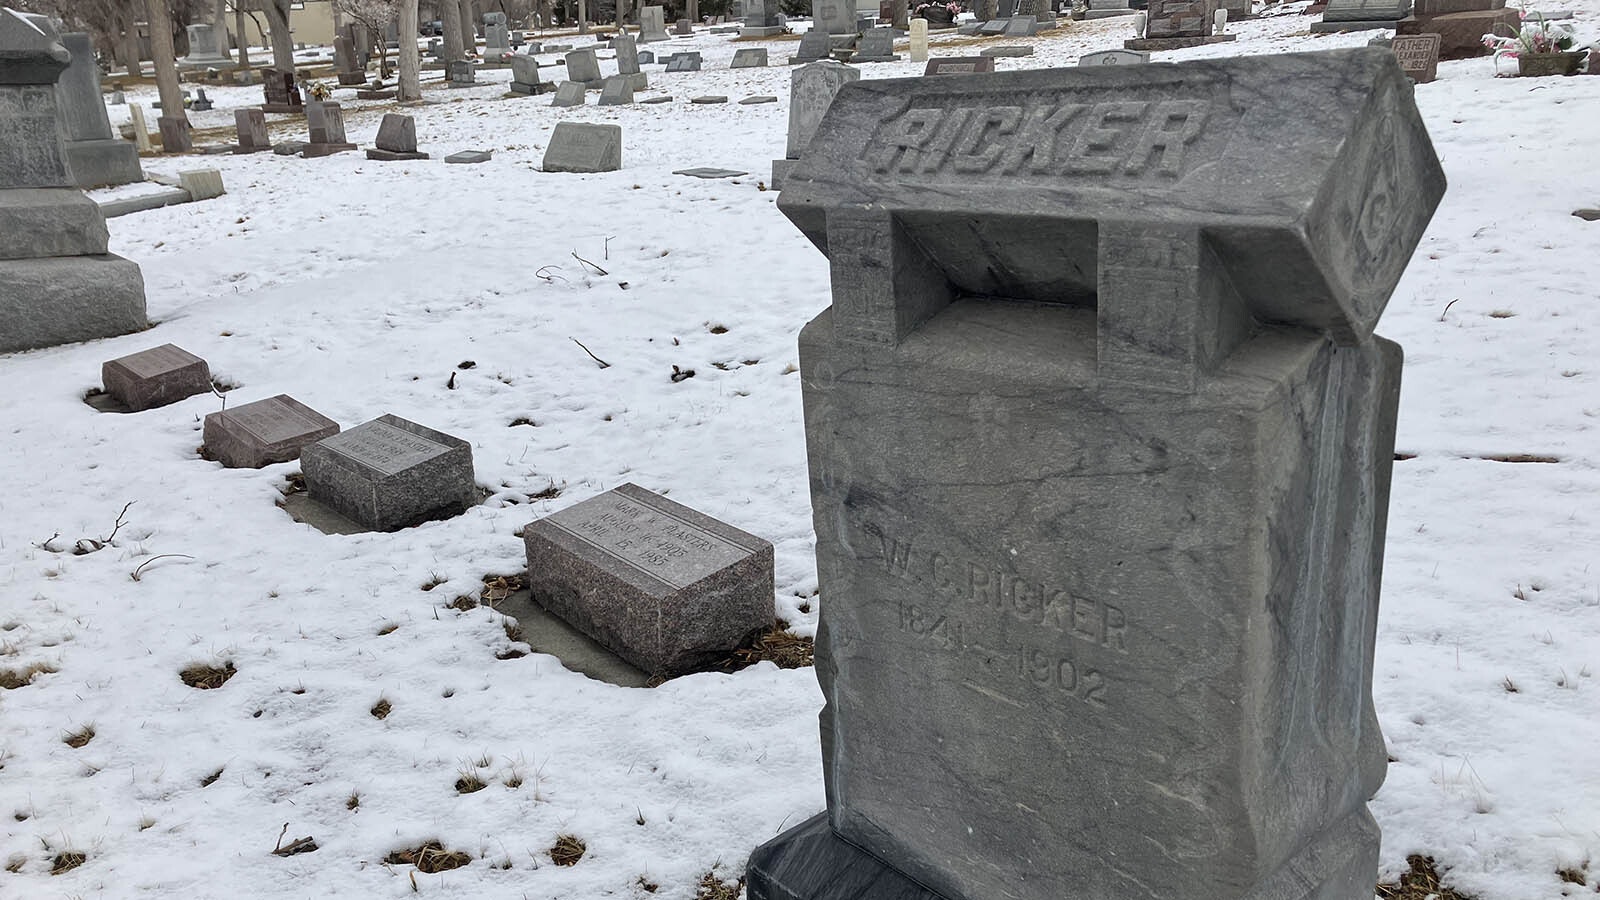 The grave of W.C. Ricker, who was honored at a large turnout at his funeral in Casper by members of the fire department, Masons and Odd Fellows, to which he belonged. The funeral featured his favorite hymn, “Asleep In Jesus.”